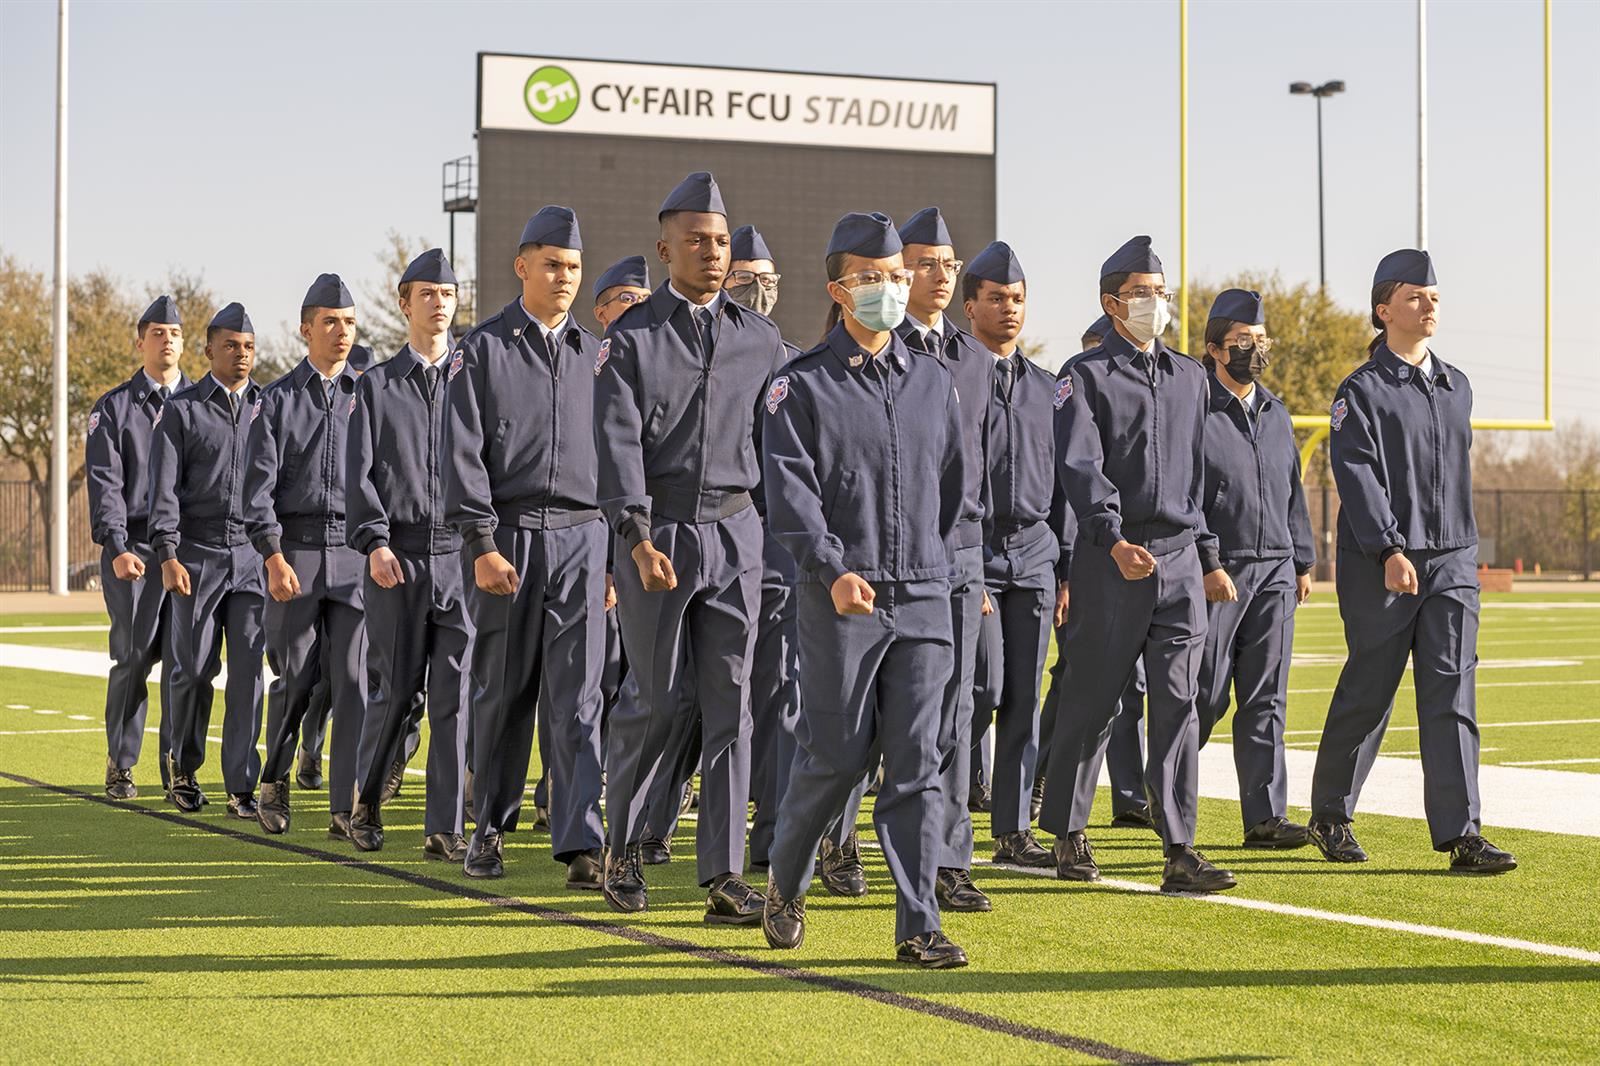  Air Force Junior ROTC units marched in front of the many guests and dignitaries in attendance.